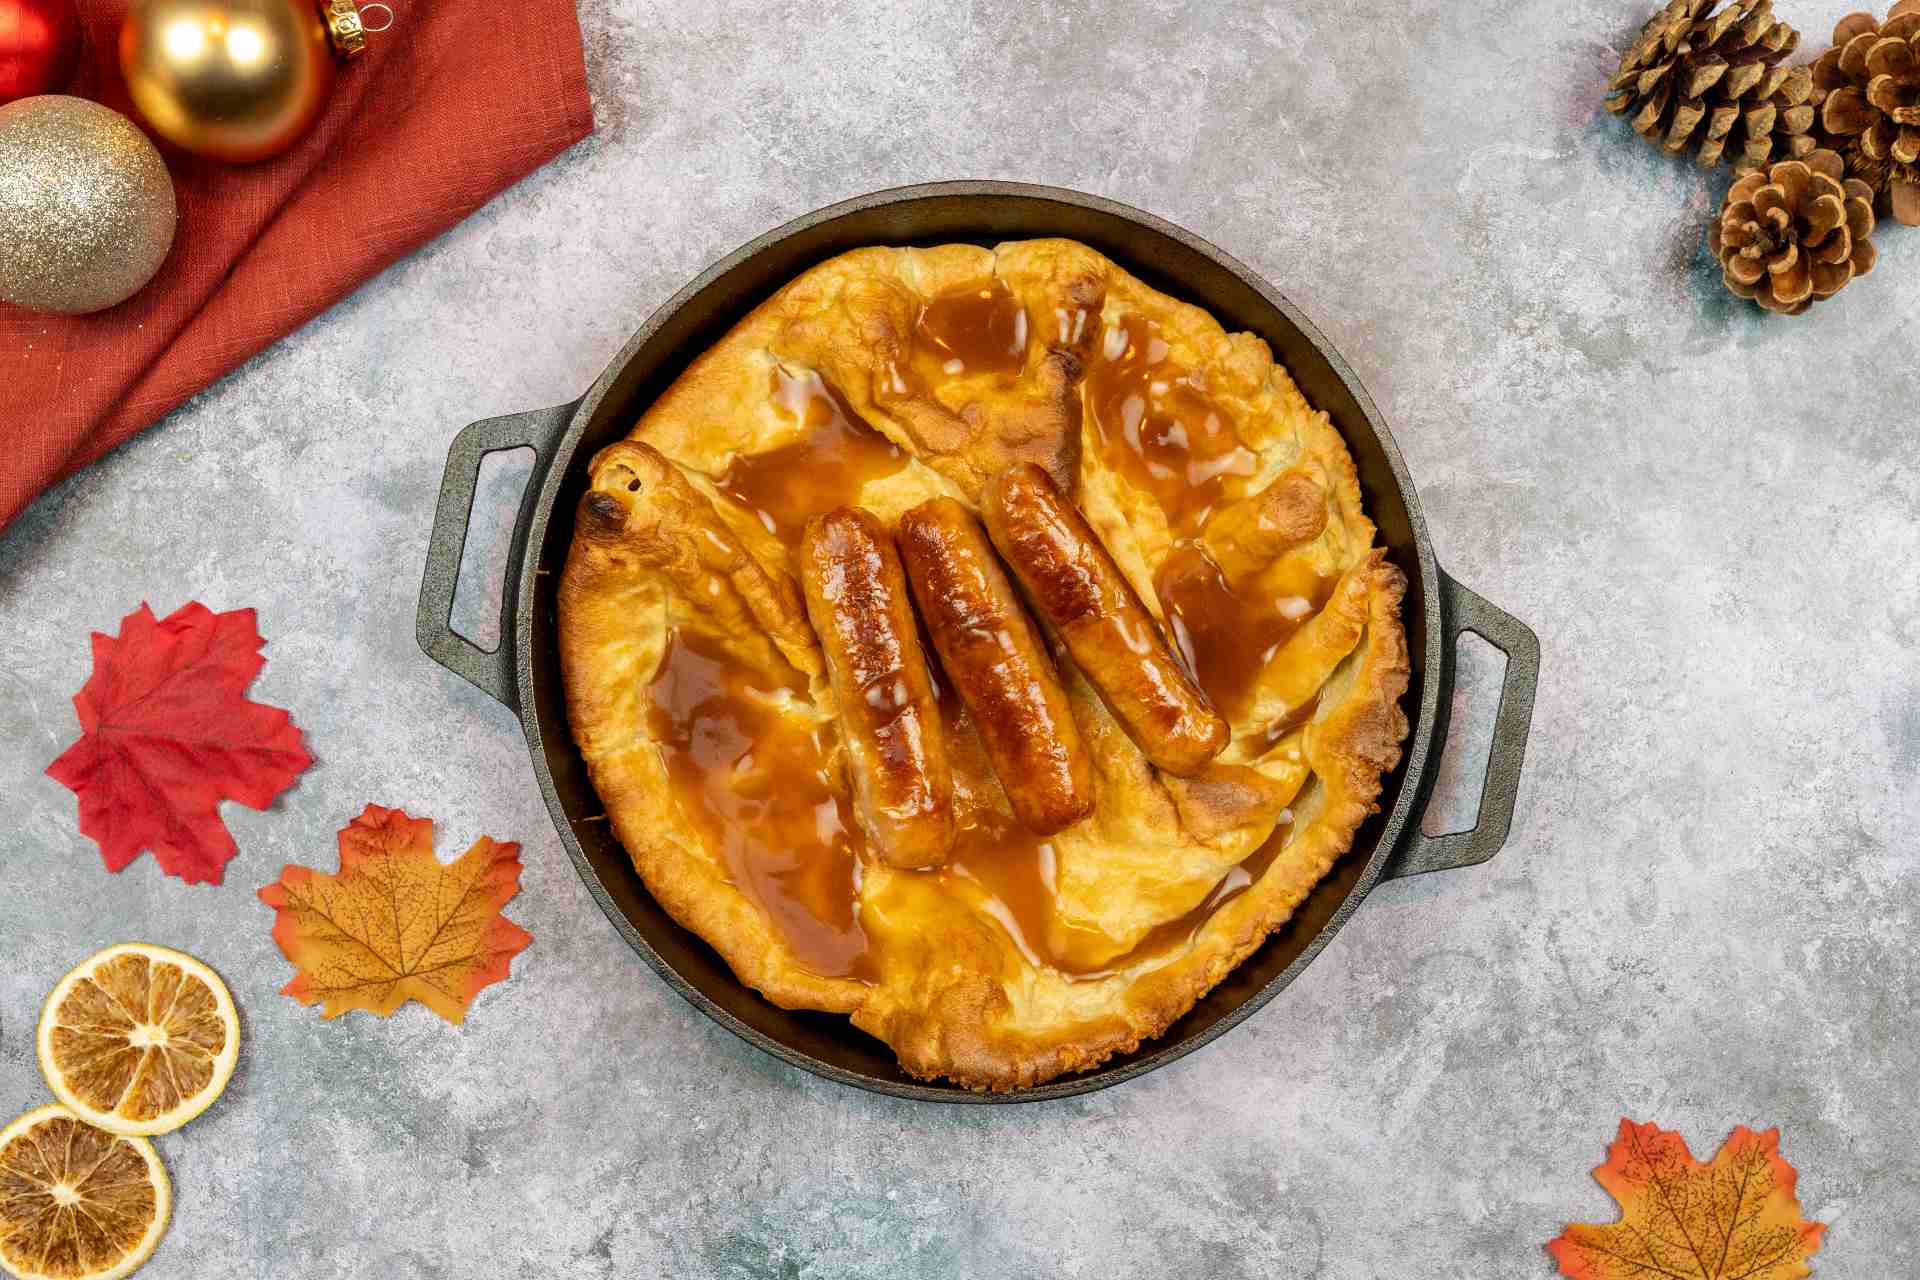 Skillet Yorkshire Pudding Recipe - The Best Yorkshire Puddings